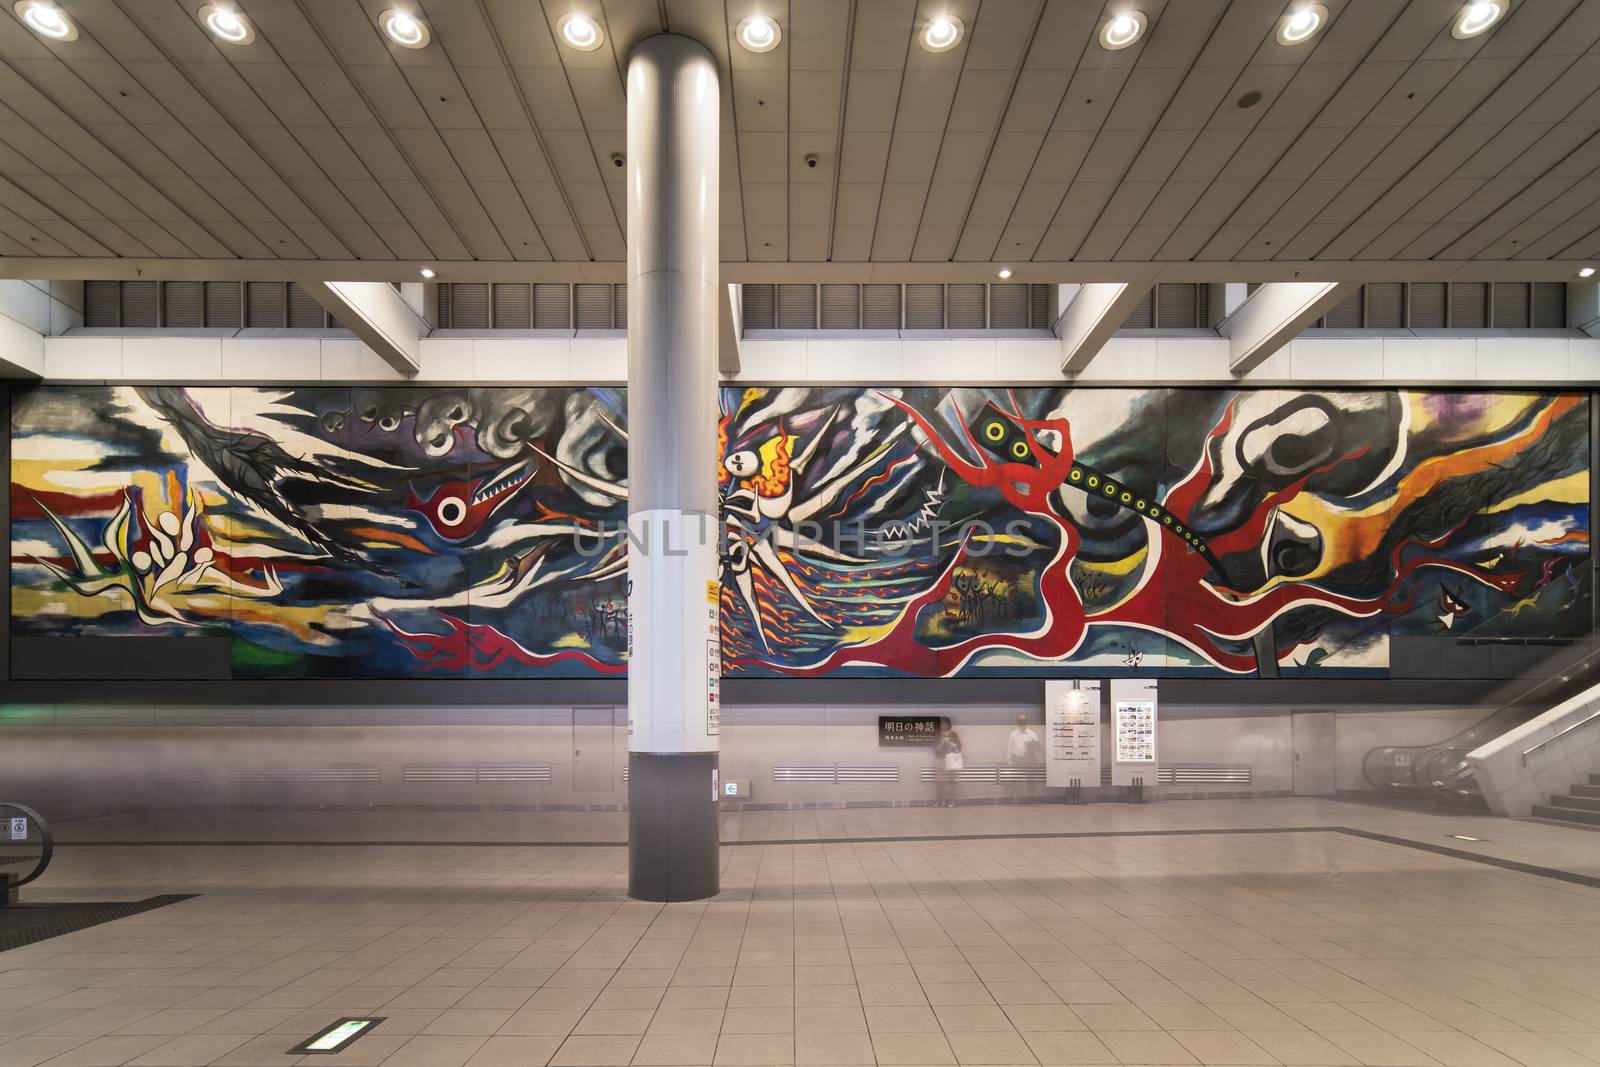 Hall of SHIBUYA station leading to the Inokashira line and whose wall is decorated with a giant fresco about the atomic experience of Hiroshima called Myth of Tomorrow painted by Okamoto Taro in 1969.